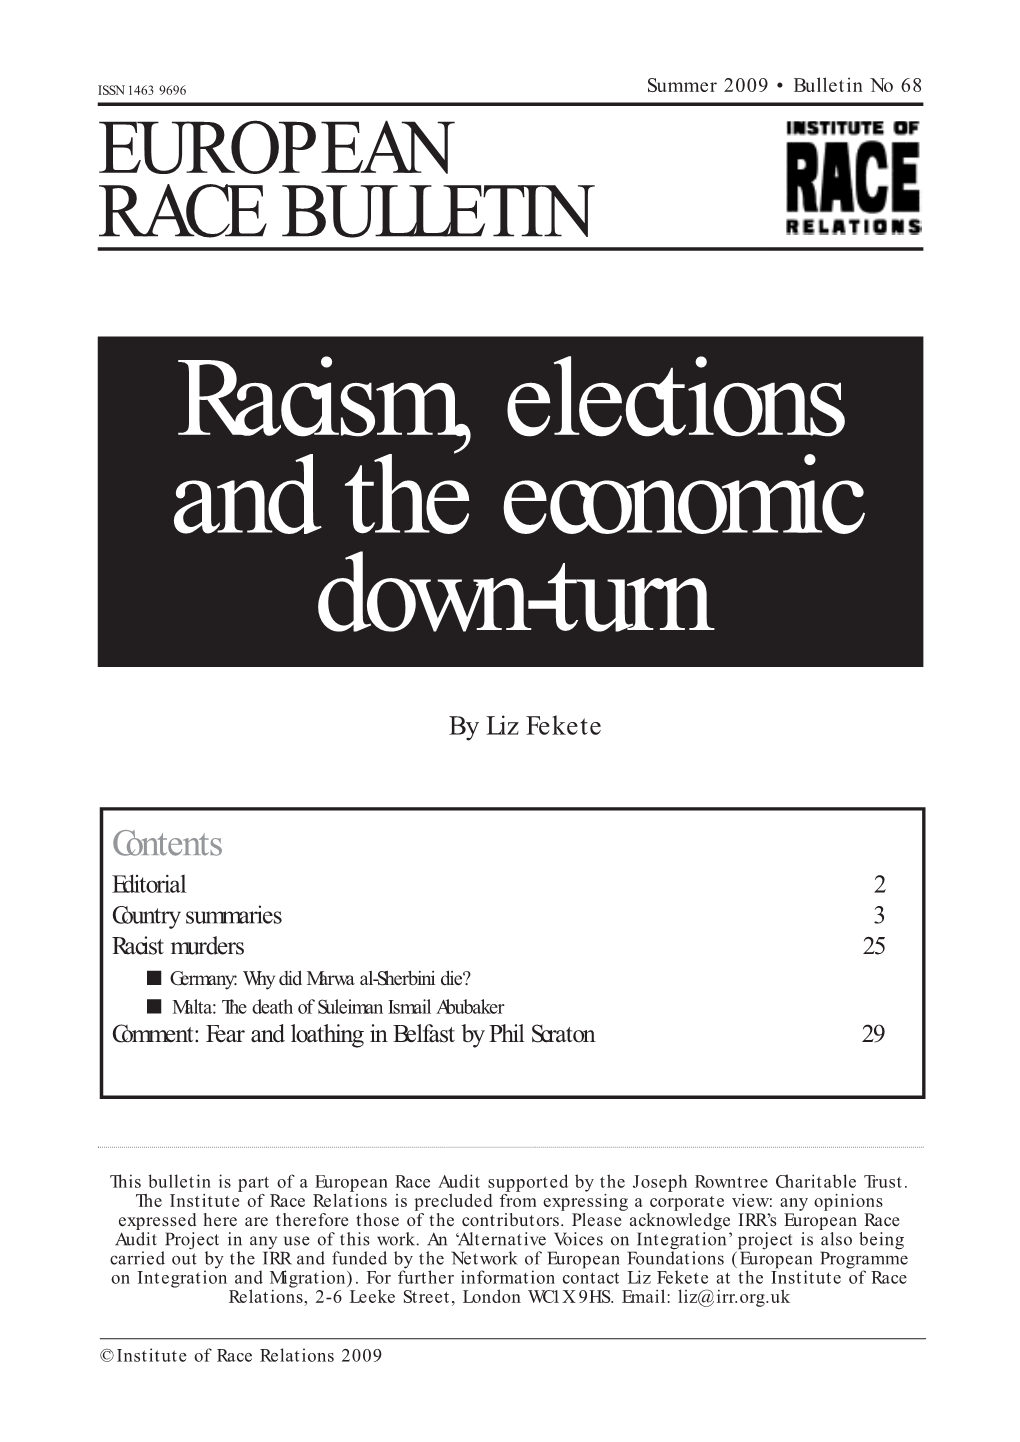 Racism, Elections and the Economic Down-Turn